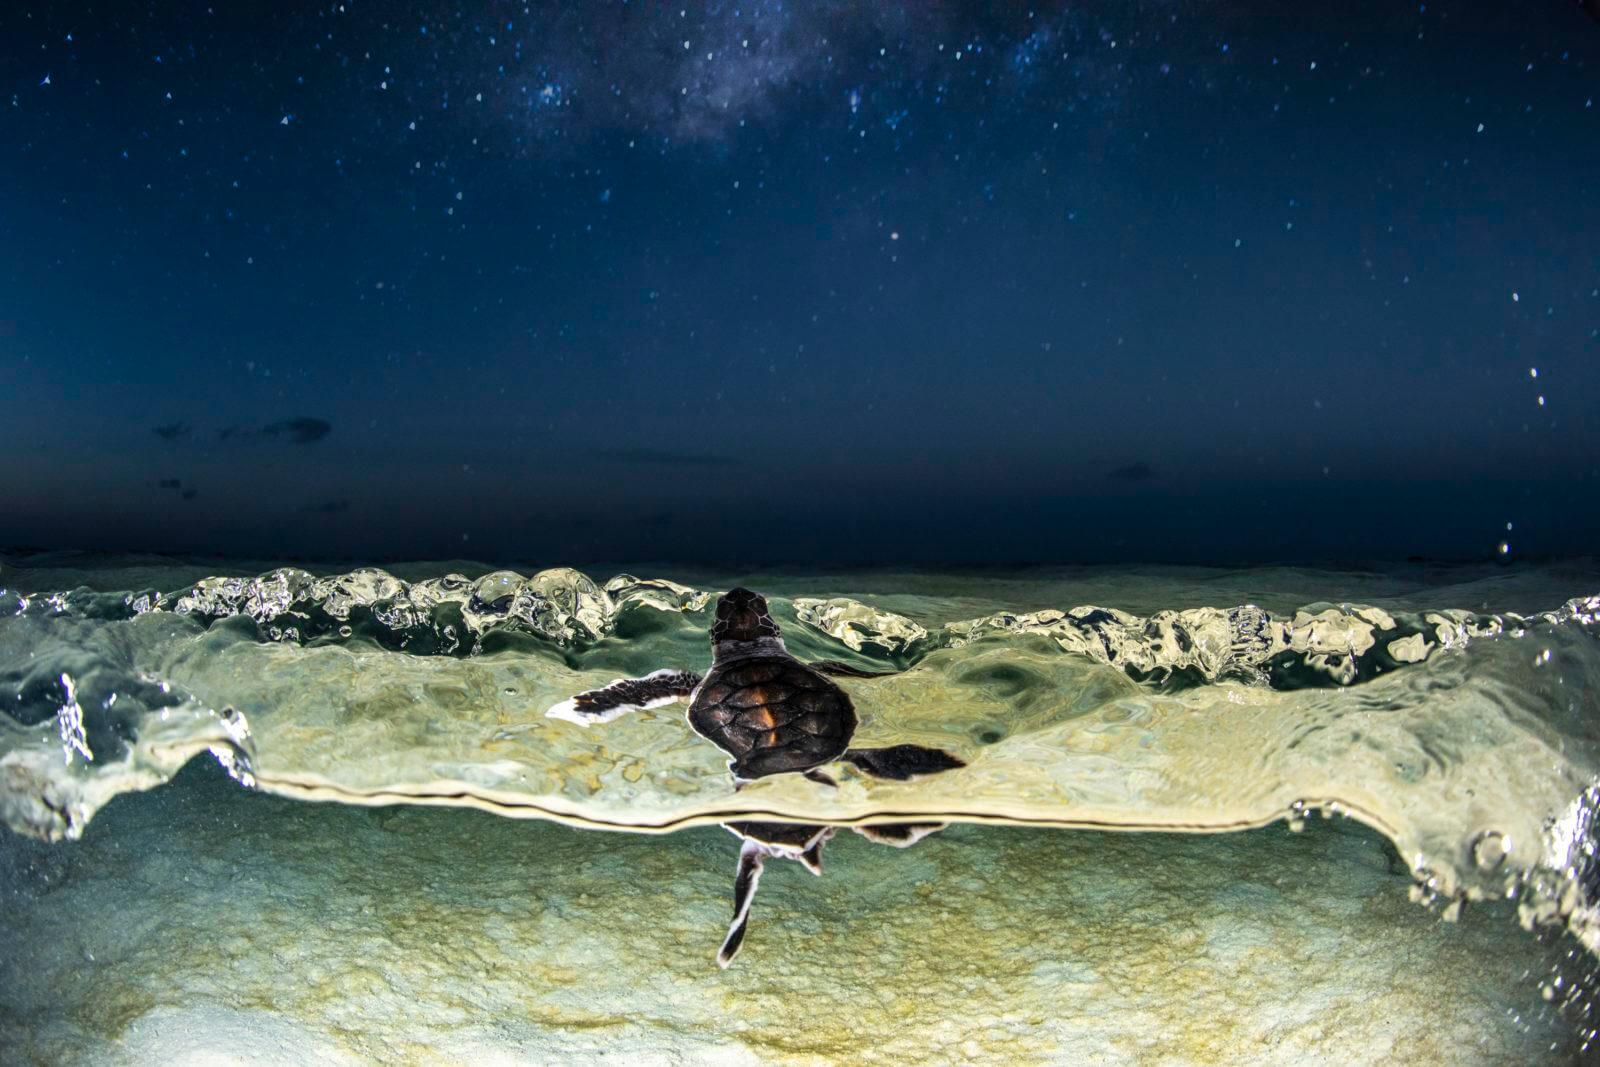 Turtles hatching at night by Alex Kydd